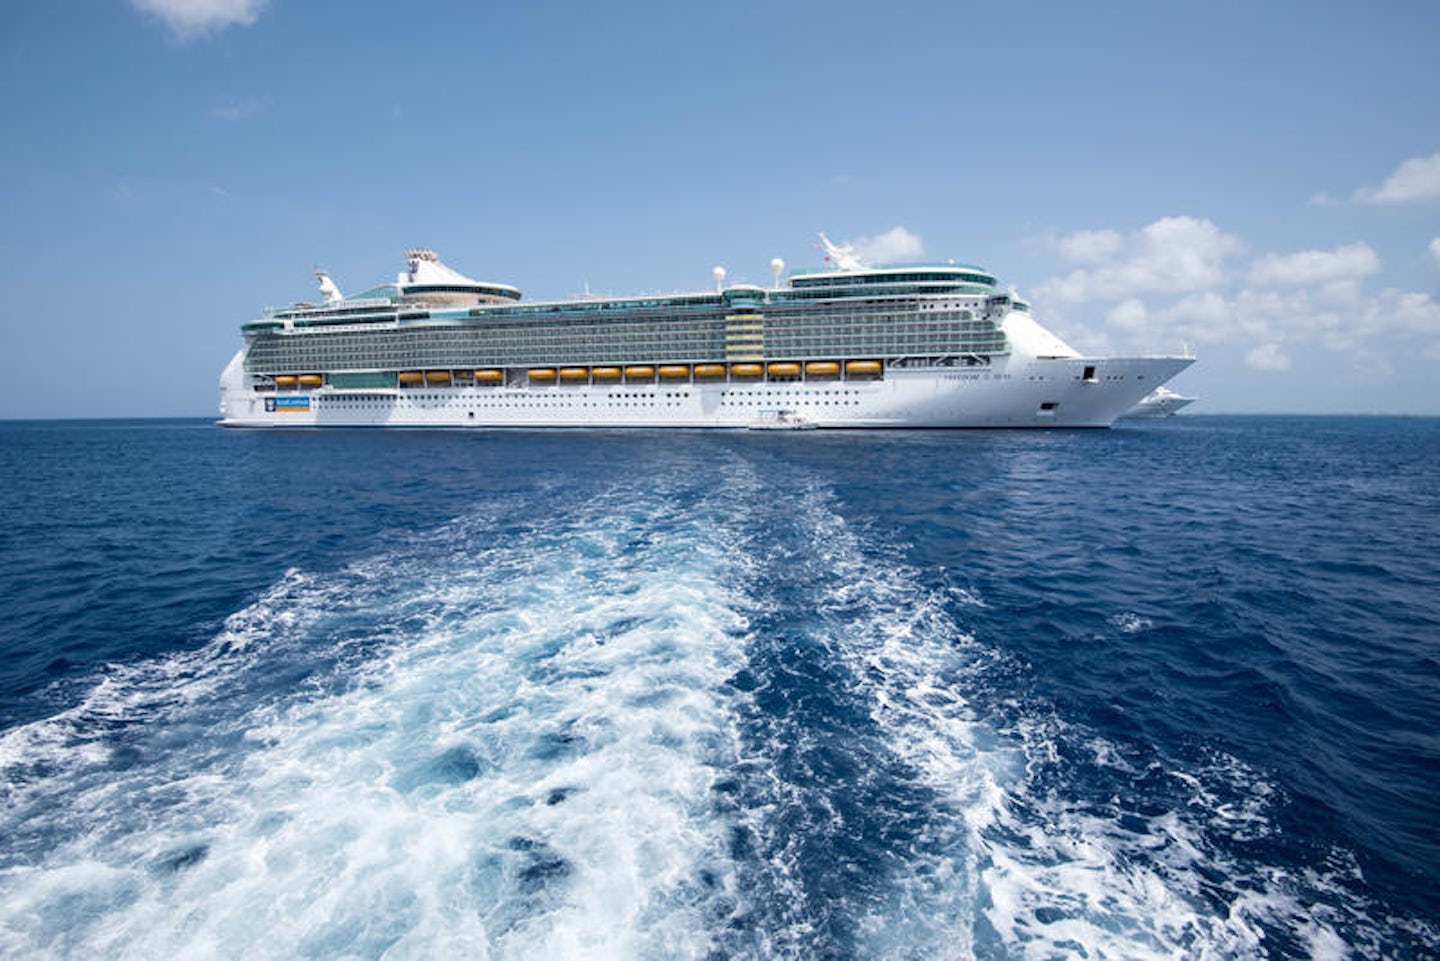 Exterior on Freedom of the Seas